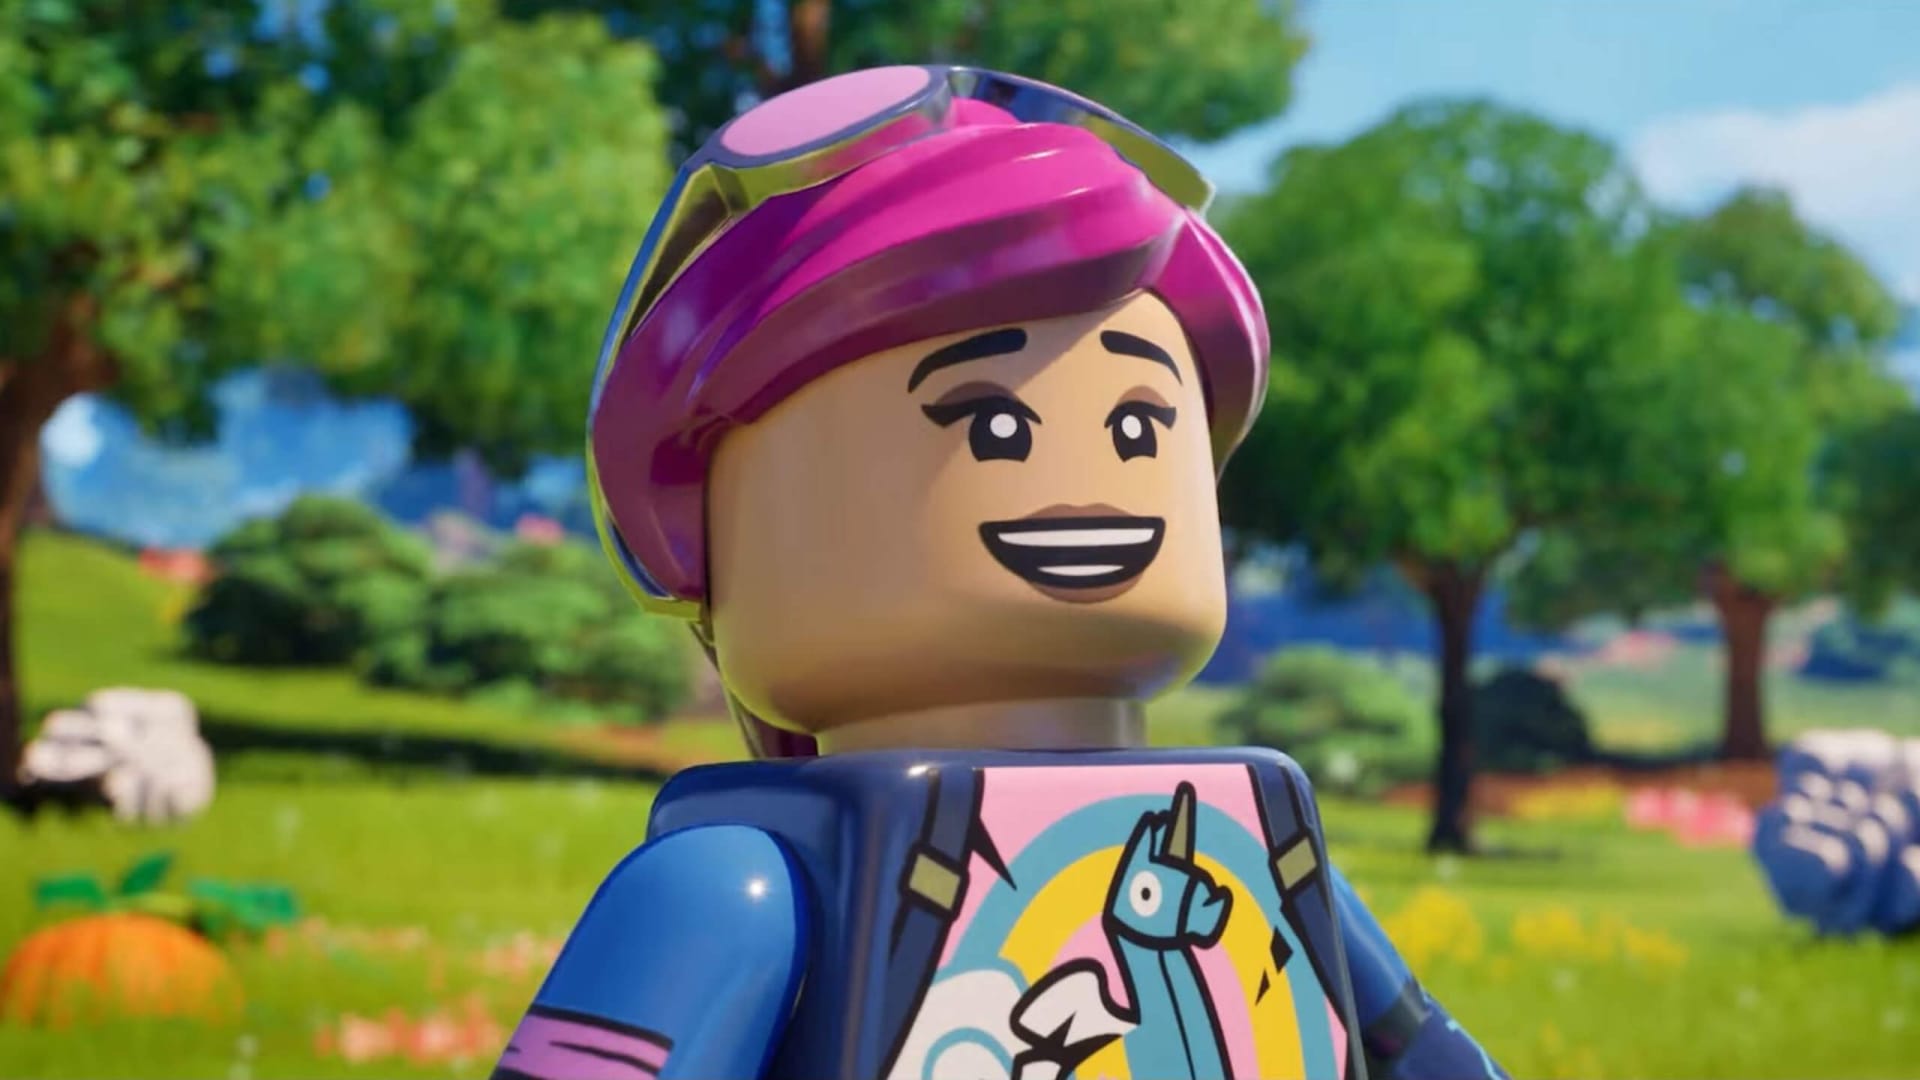 Lego Fortnite Cinematic Trailer Teases a Blocky Adventure Ahead of Tomorrow’s Release